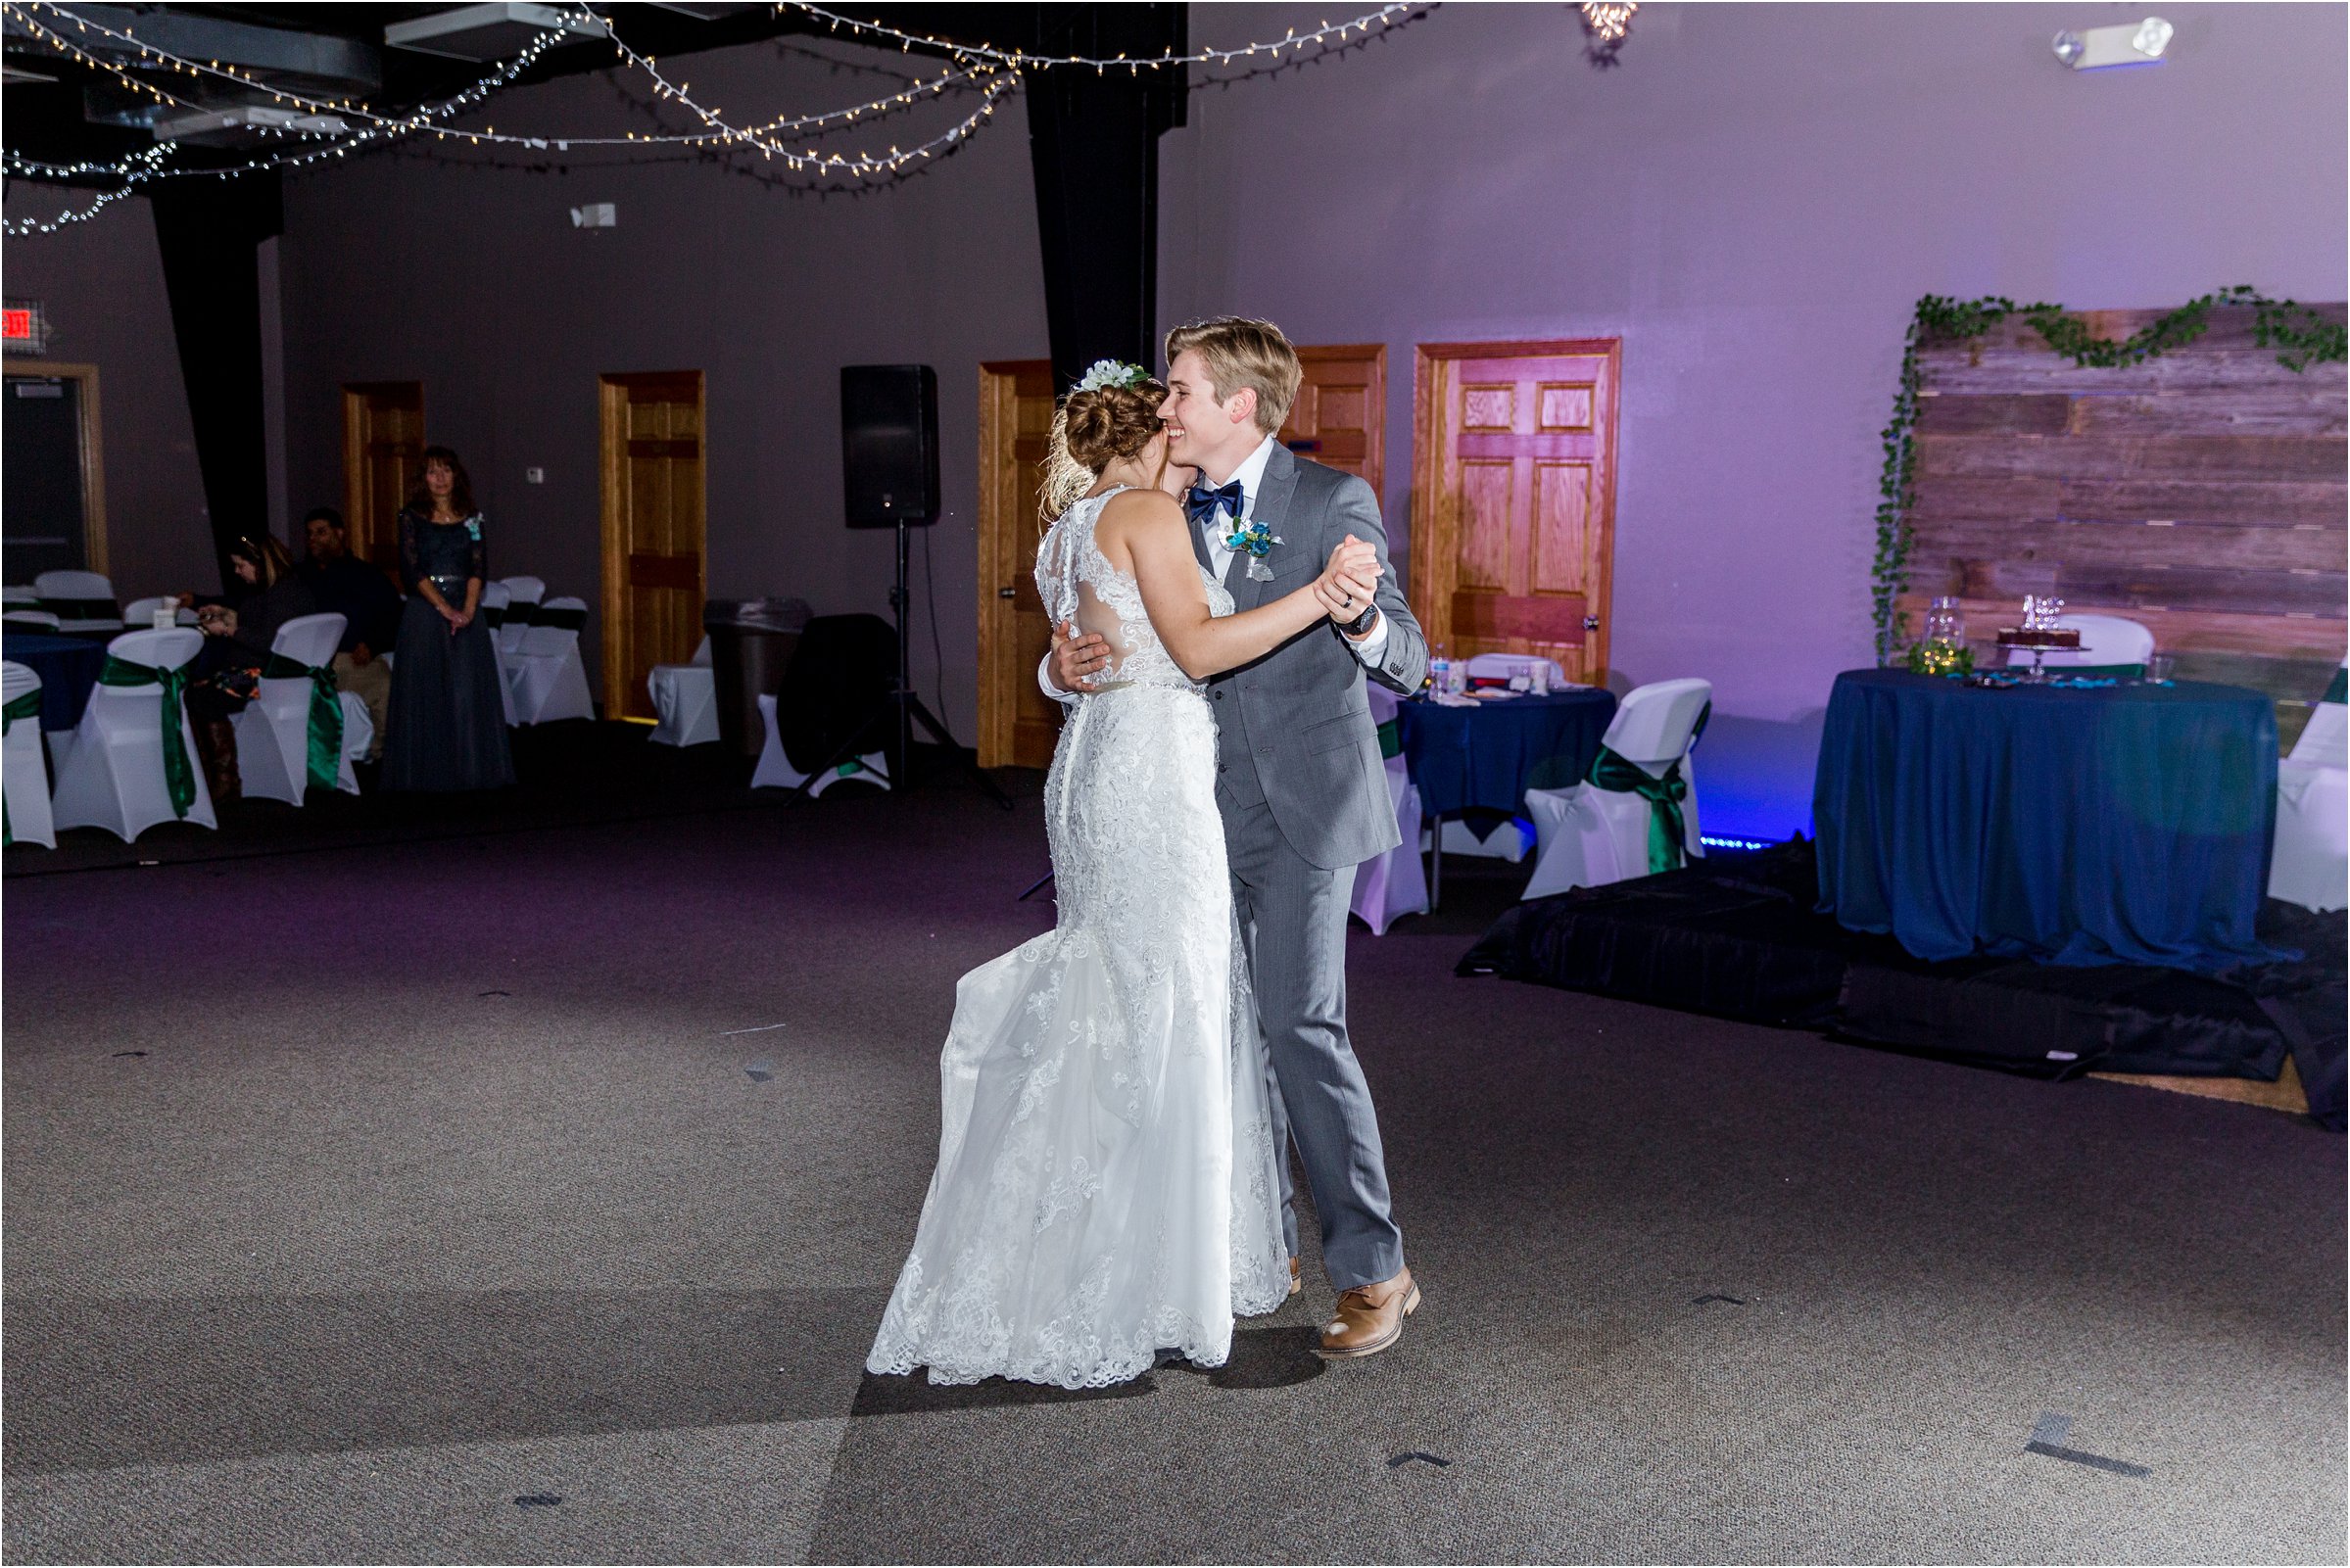 bride and groom dancing their first dance together as husband and wife at their wedding reception